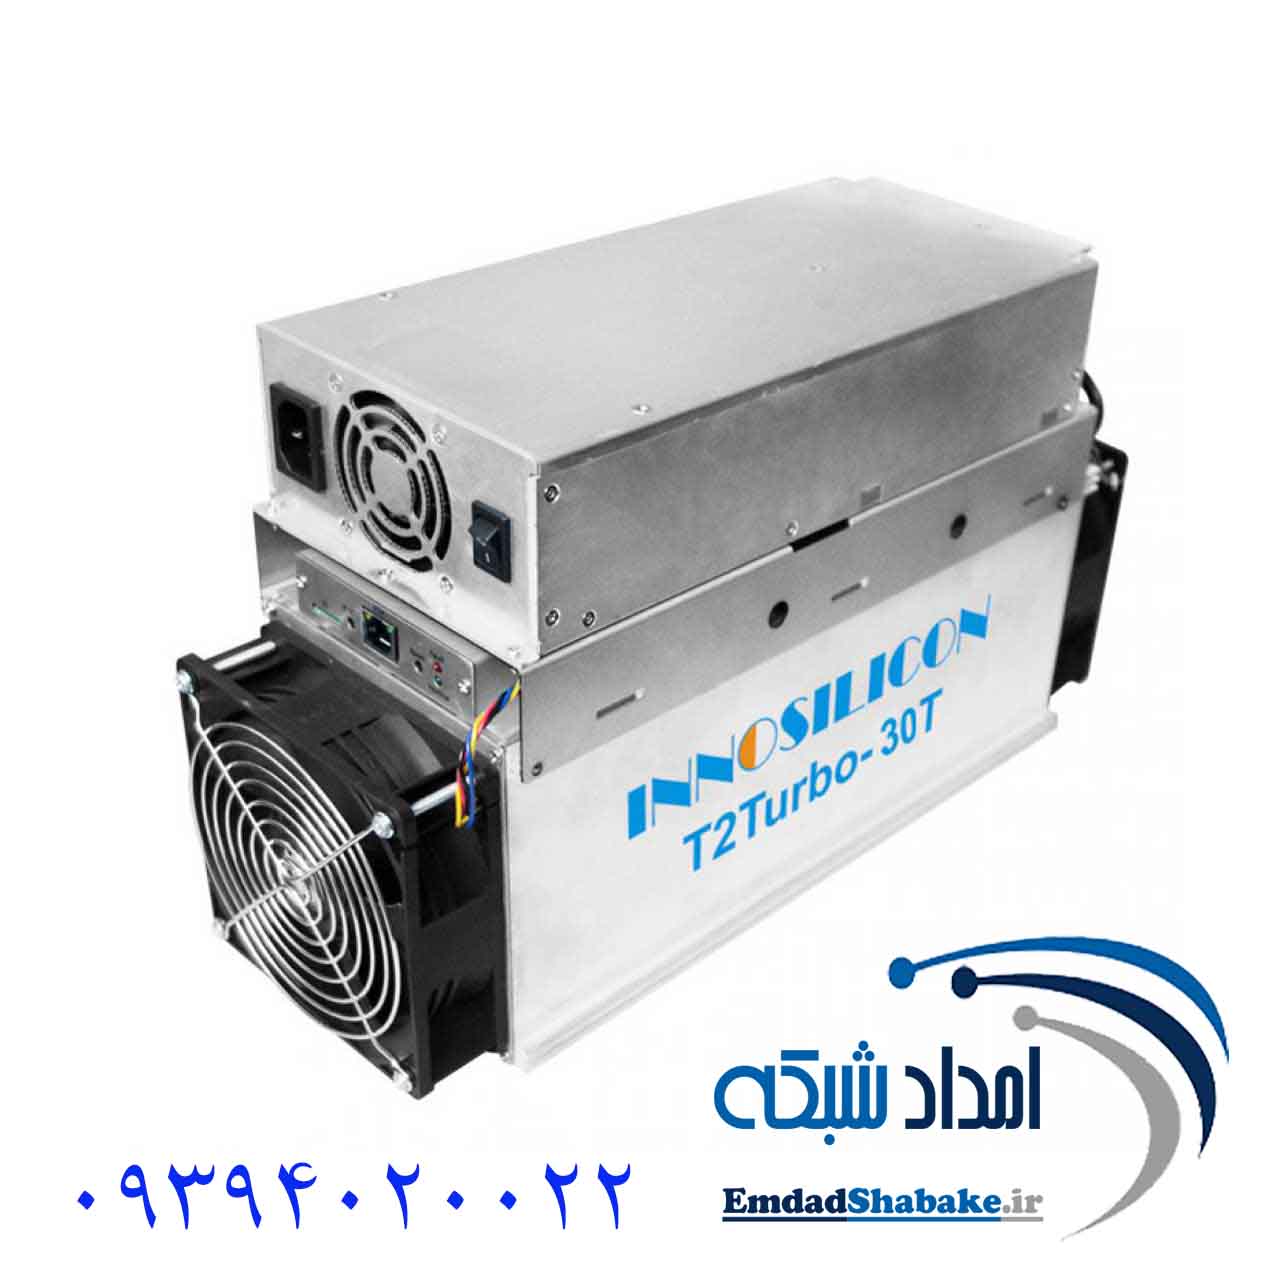 Innosilicon T2T 1000 دستگاه ماینر اینوسیلیکون T2T 36TH